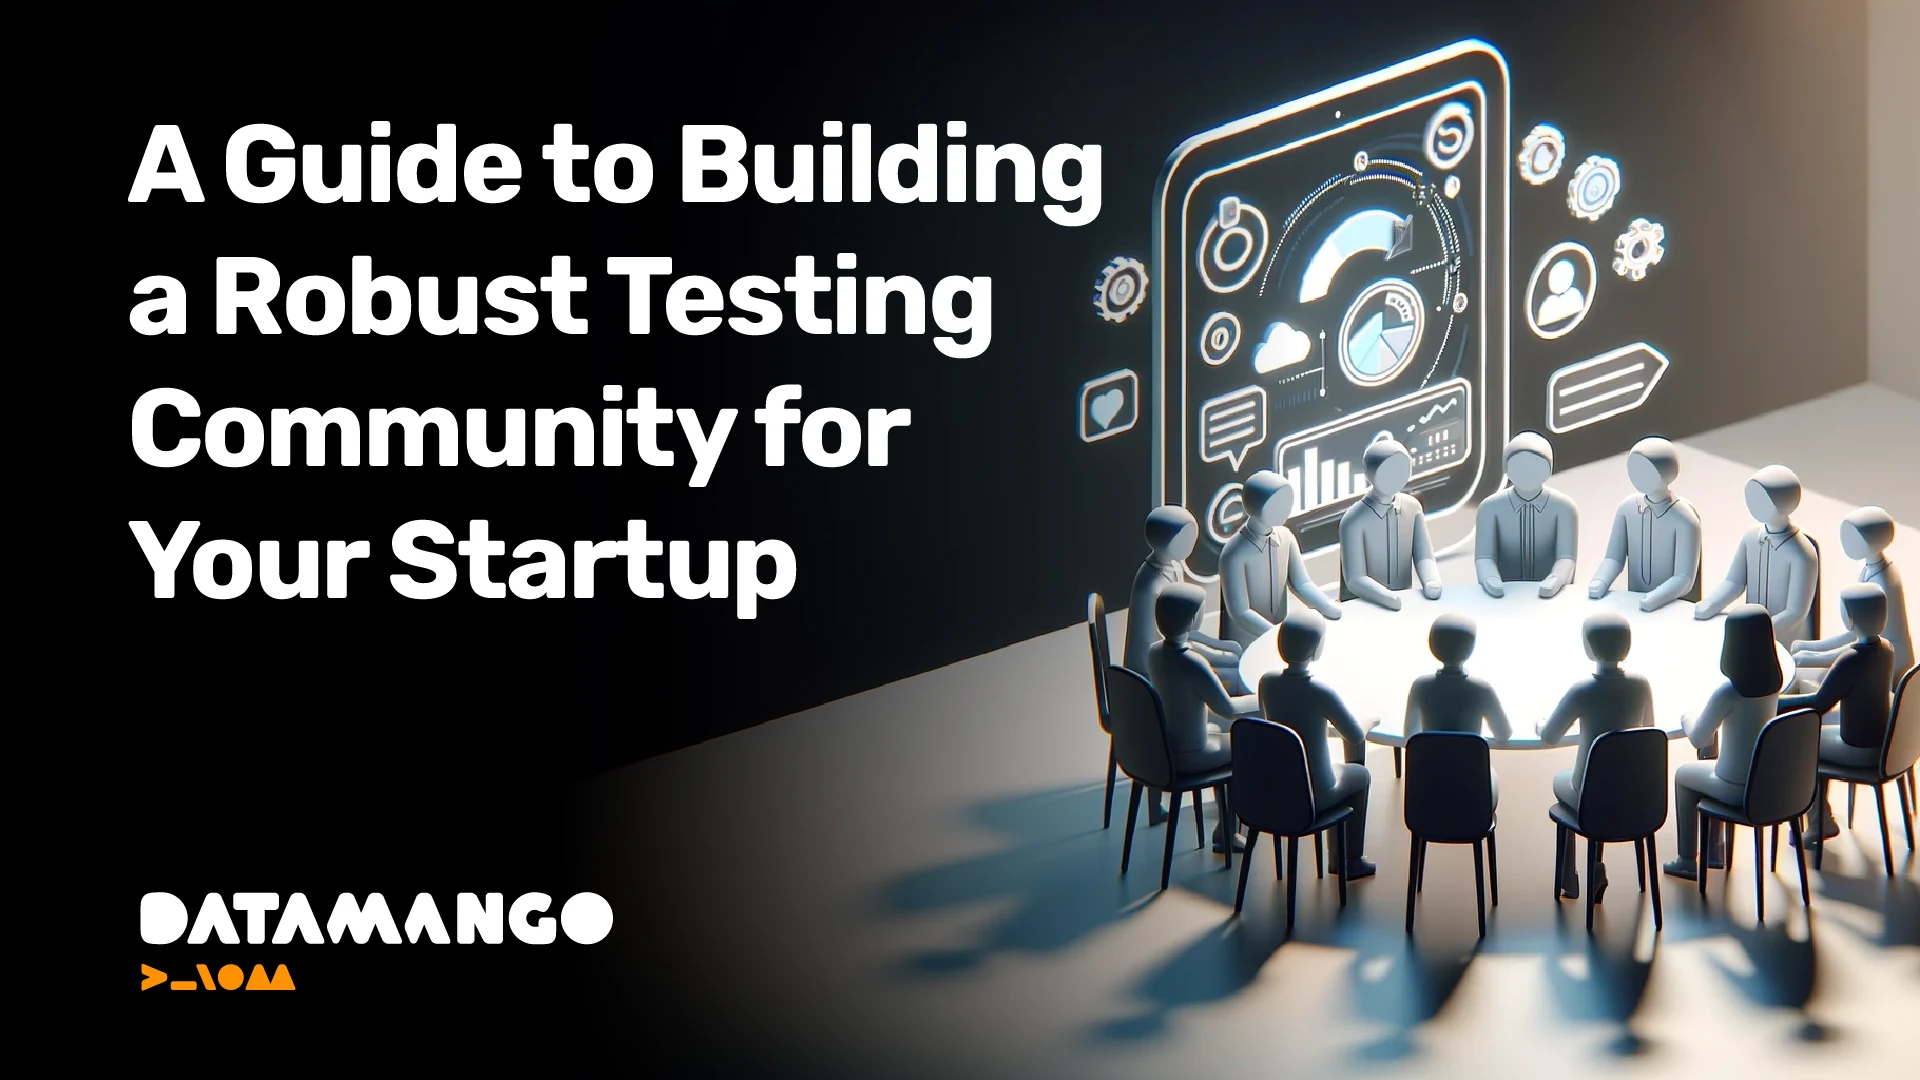 datamango-a-guide-to-building-a-robust-testing-community-for-your-startup